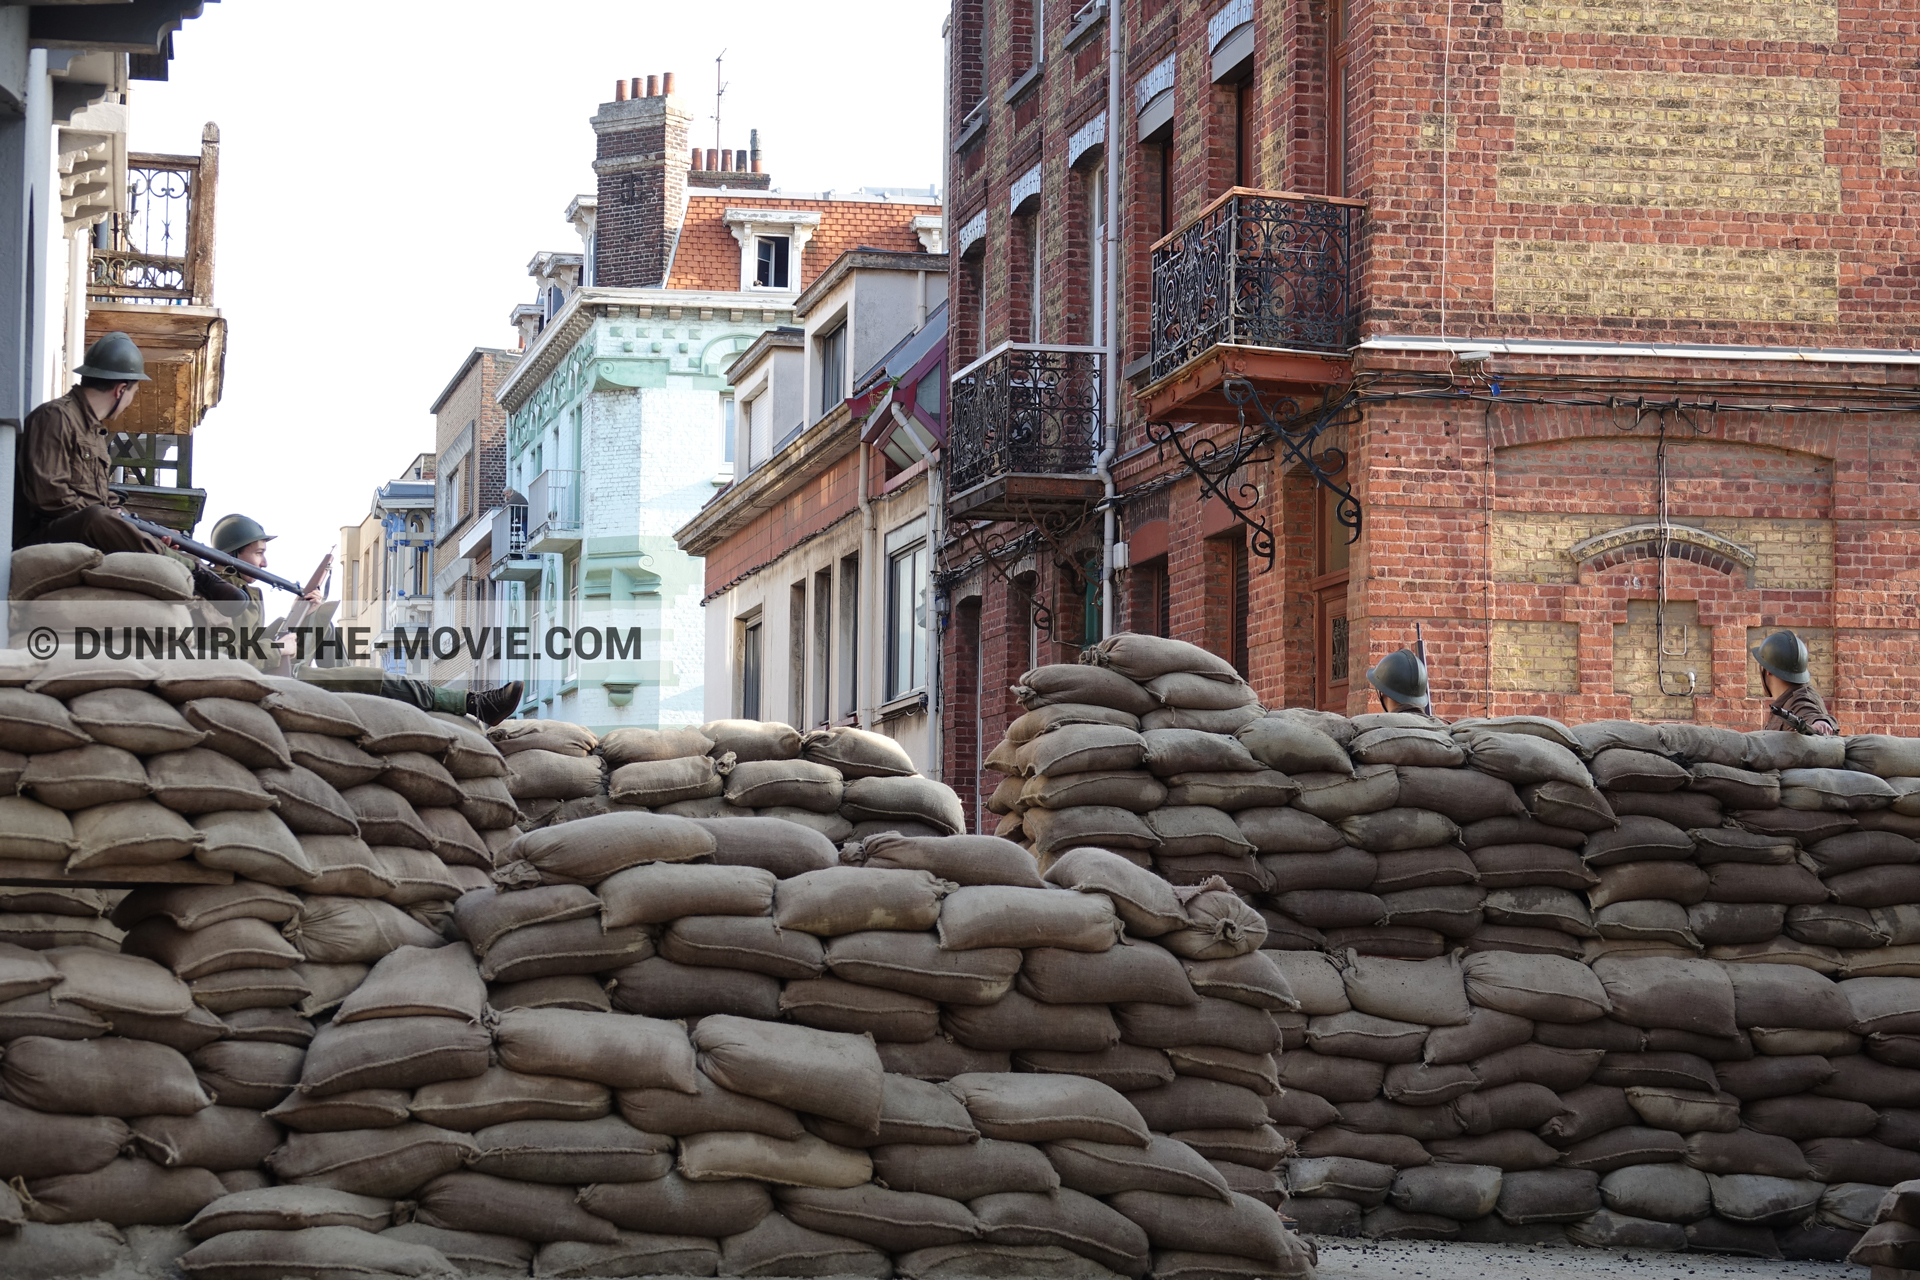 Picture with supernumeraries, Belle Rade street,  from behind the scene of the Dunkirk movie by Nolan